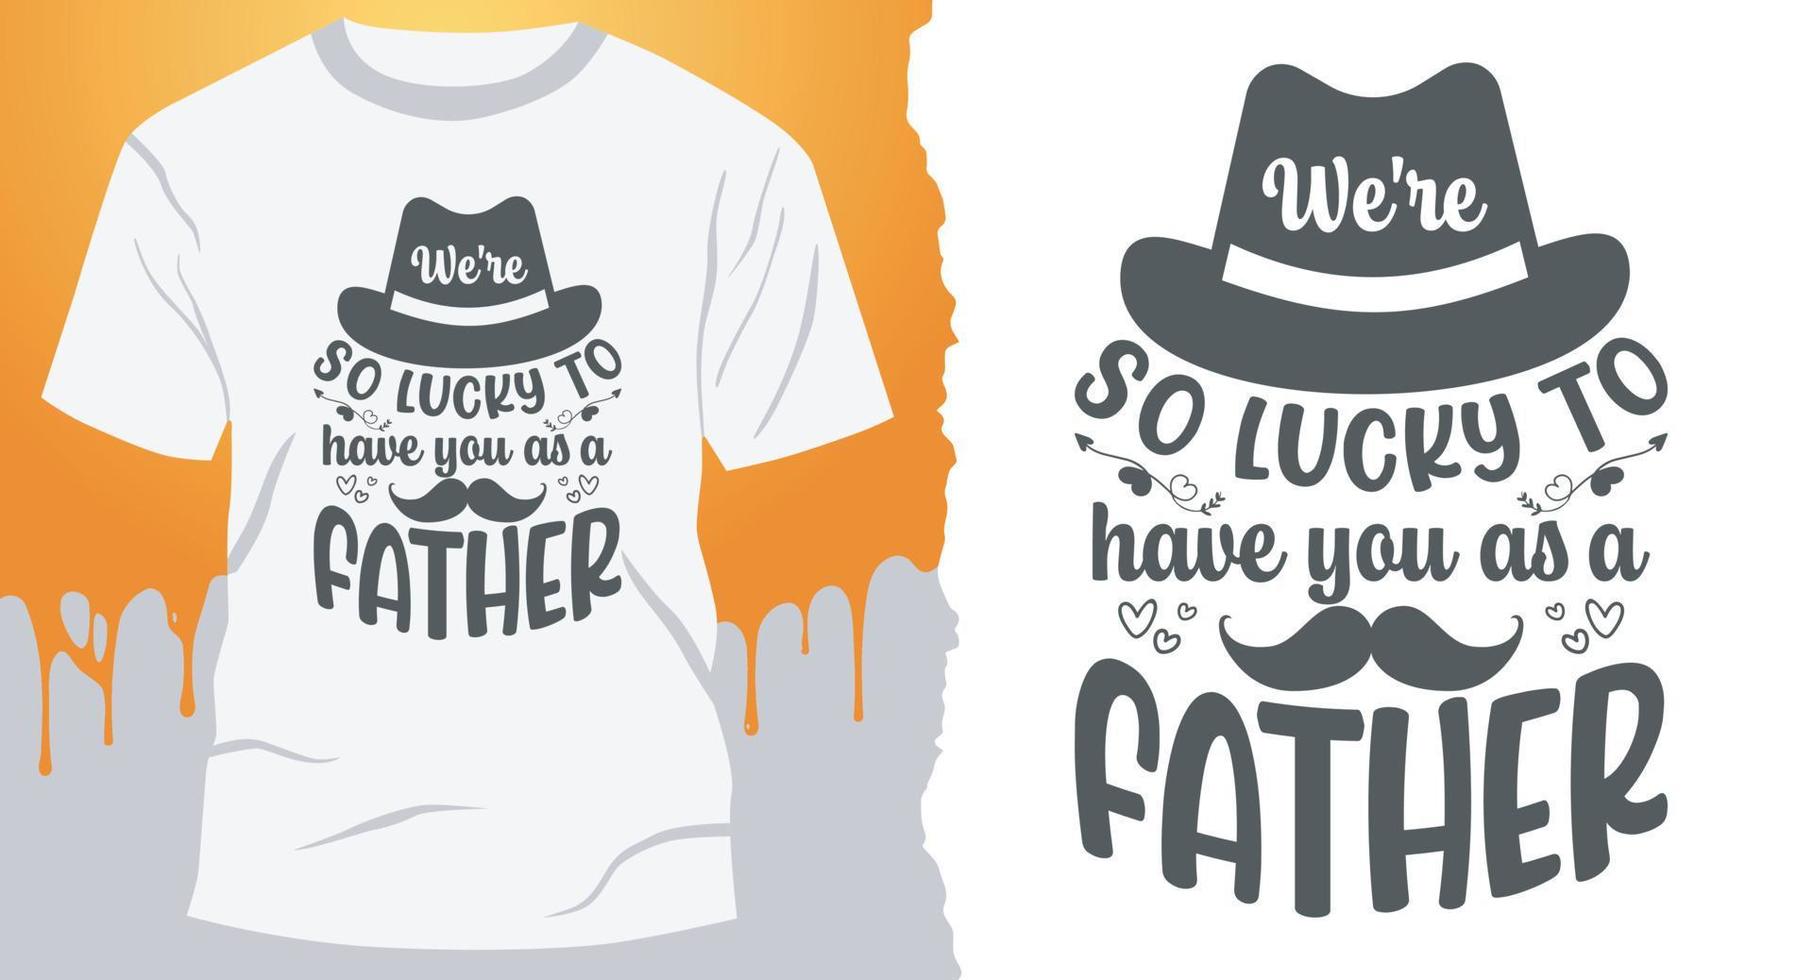 We are so lucky to have you as a father. Dad T-Shirt Design Vector for Father's Day